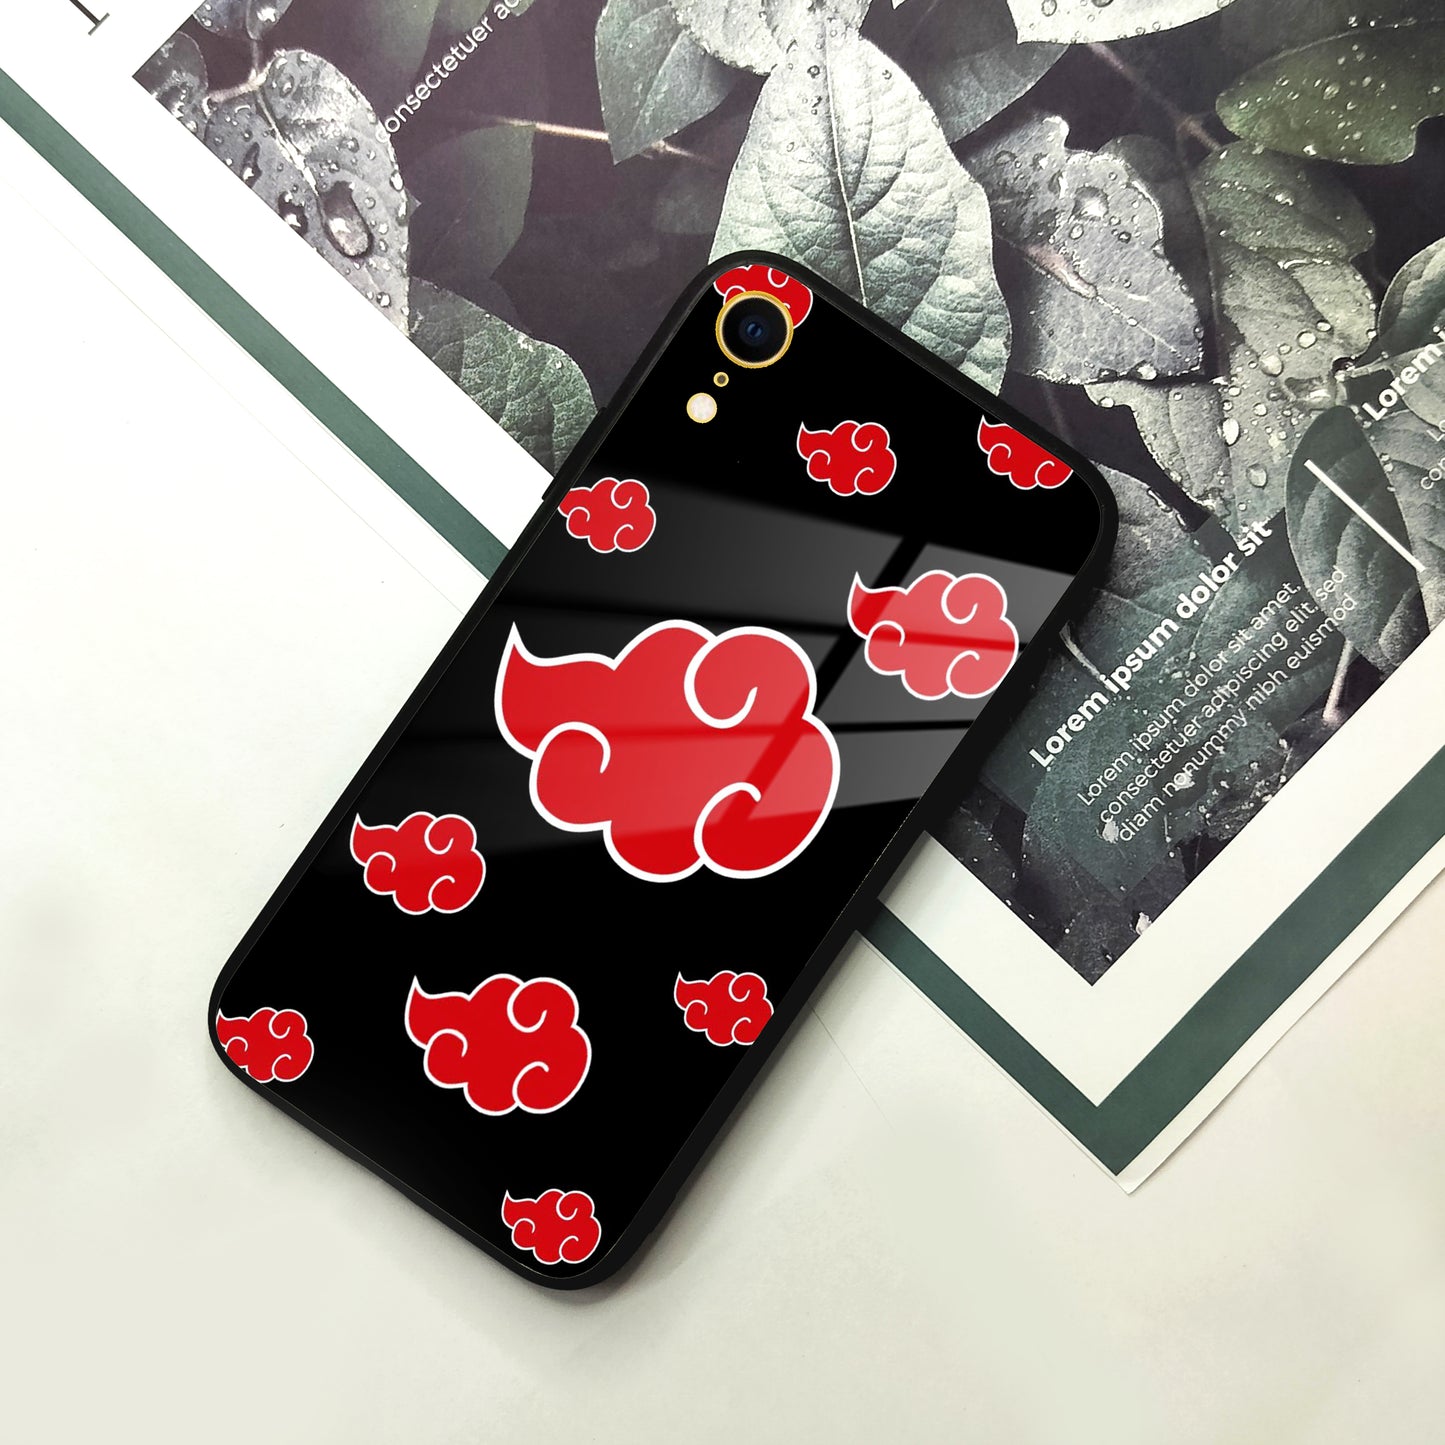 Red Cloud Mobile Glass Phone Case For iPhone